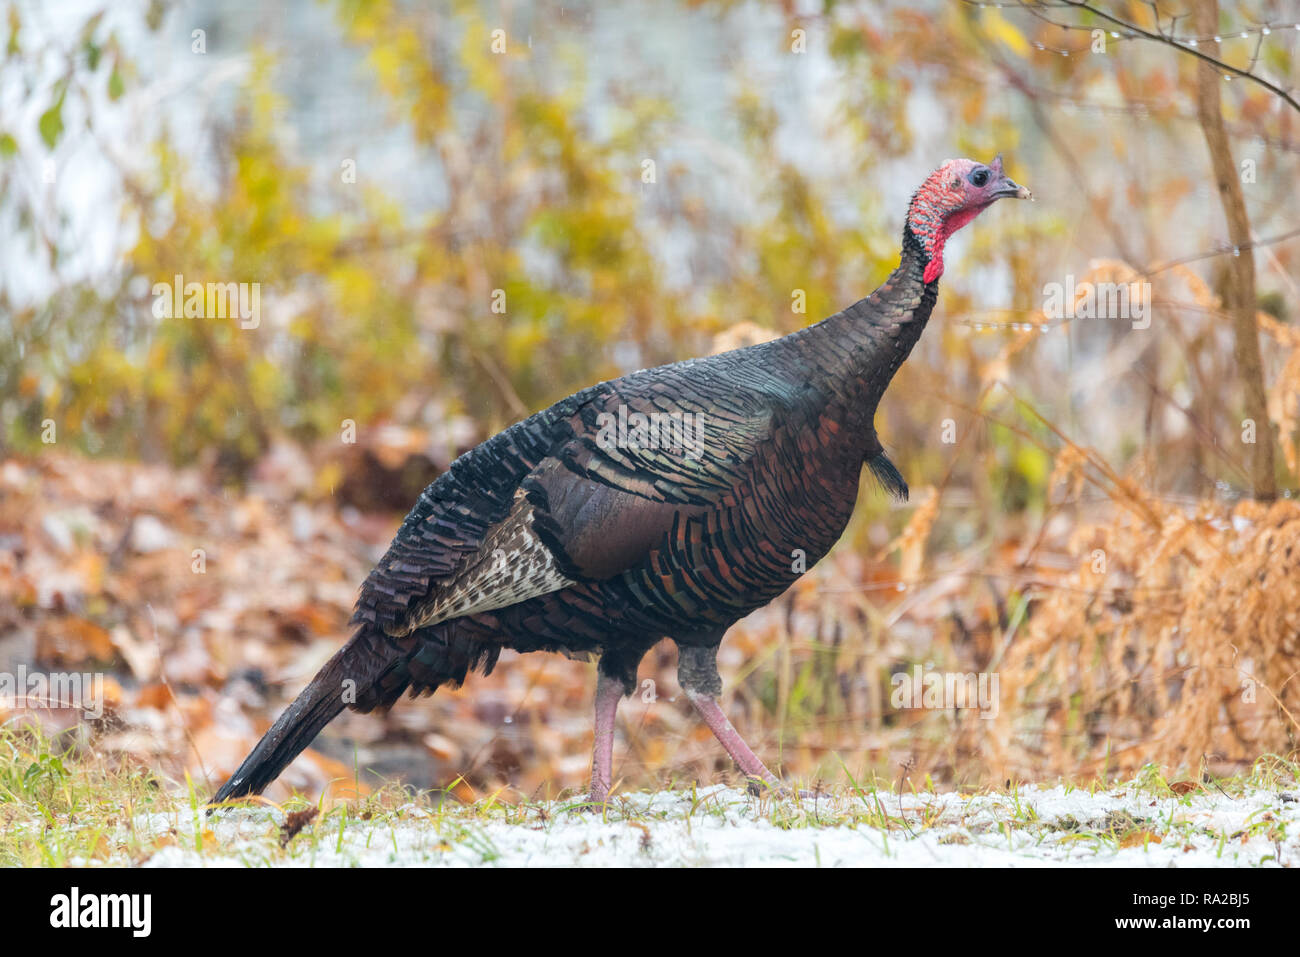 Eastern Wild Turkey (Meleagris gallopavo silvestris) hen in a autumn colored wooded yard pauses momentarily as if to pose for the camera. Stock Photo